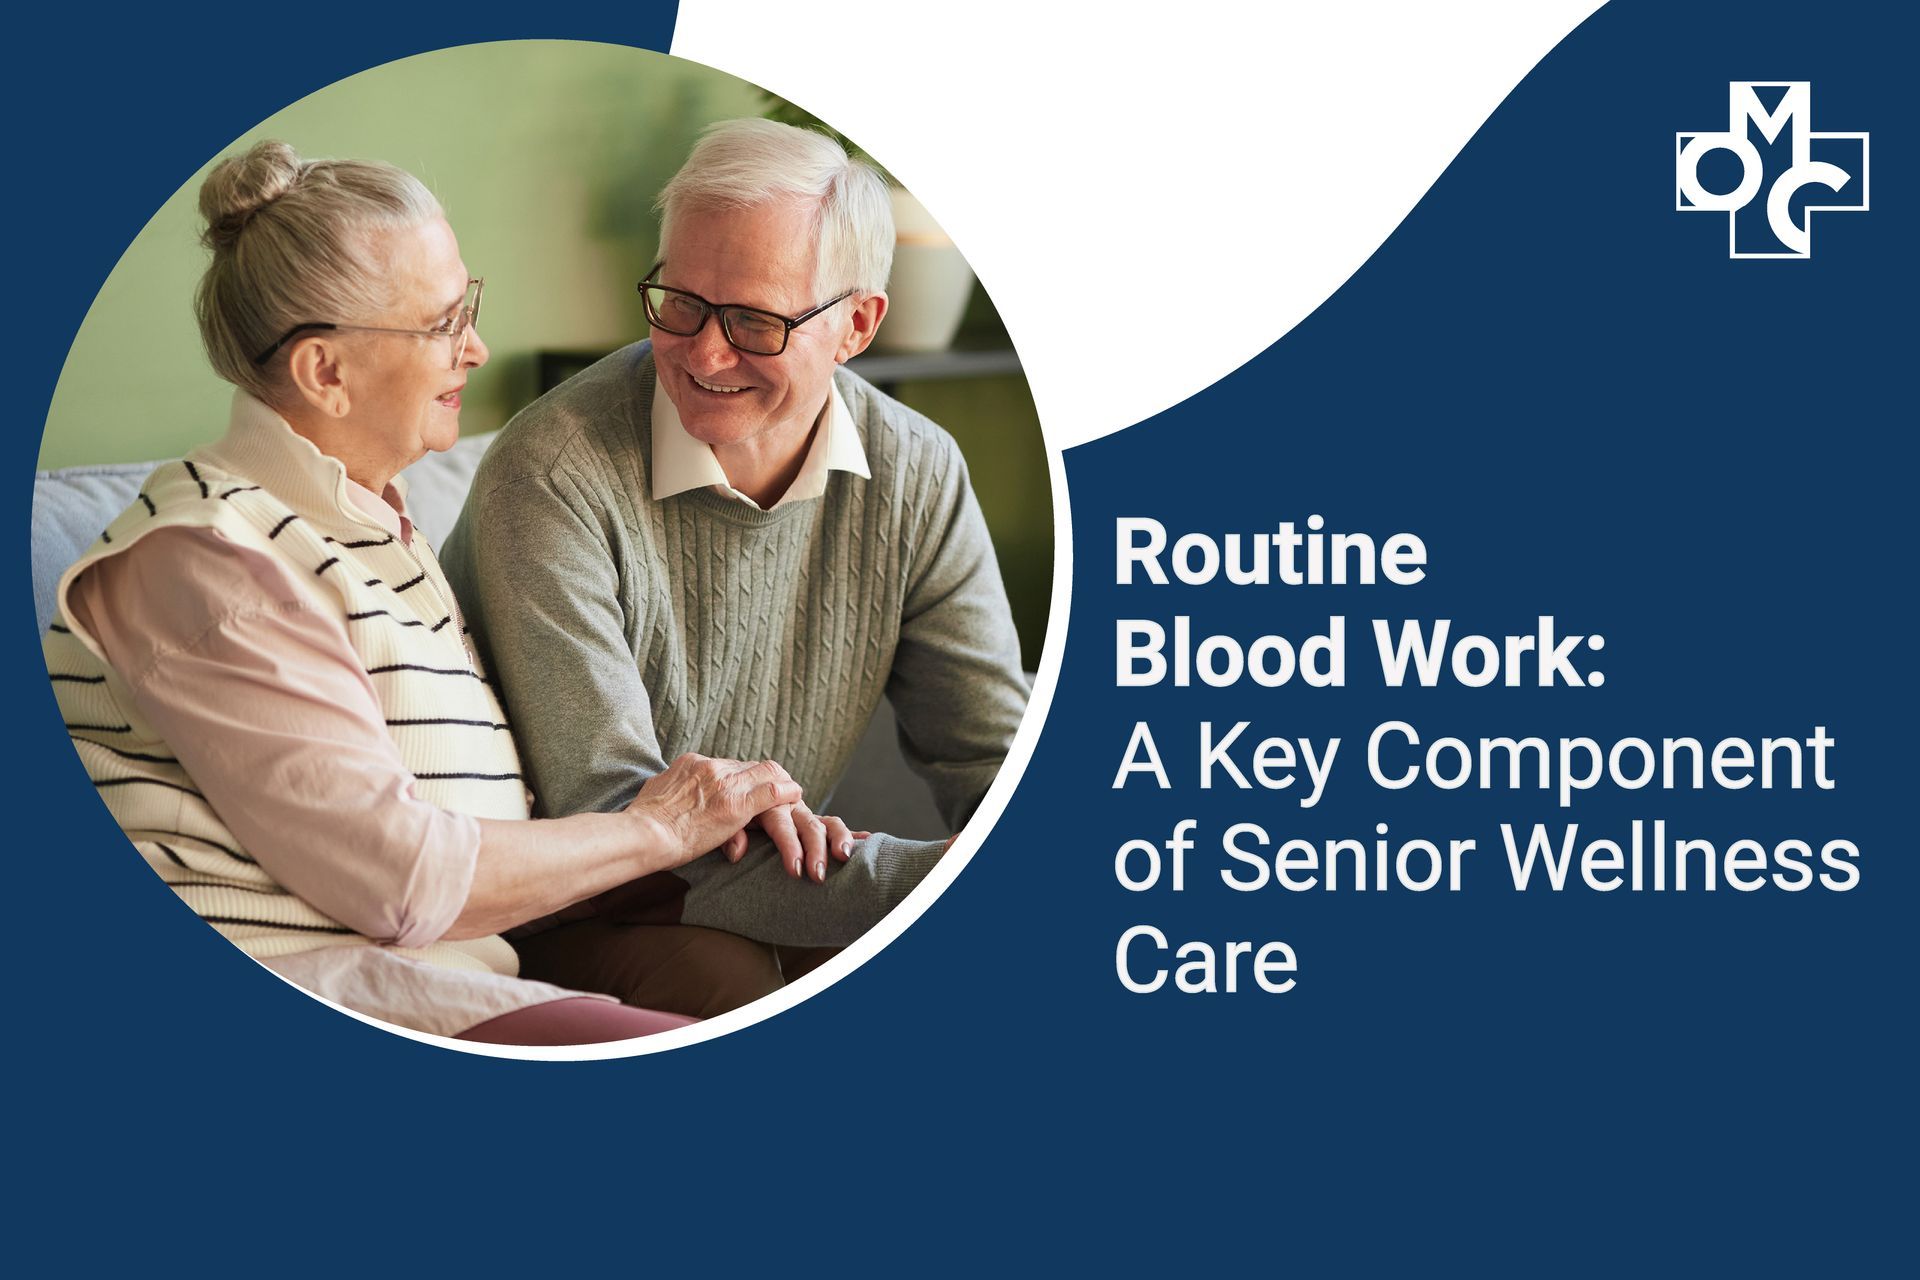 Routine Blood Work: A Key Component of Senior Wellness Care